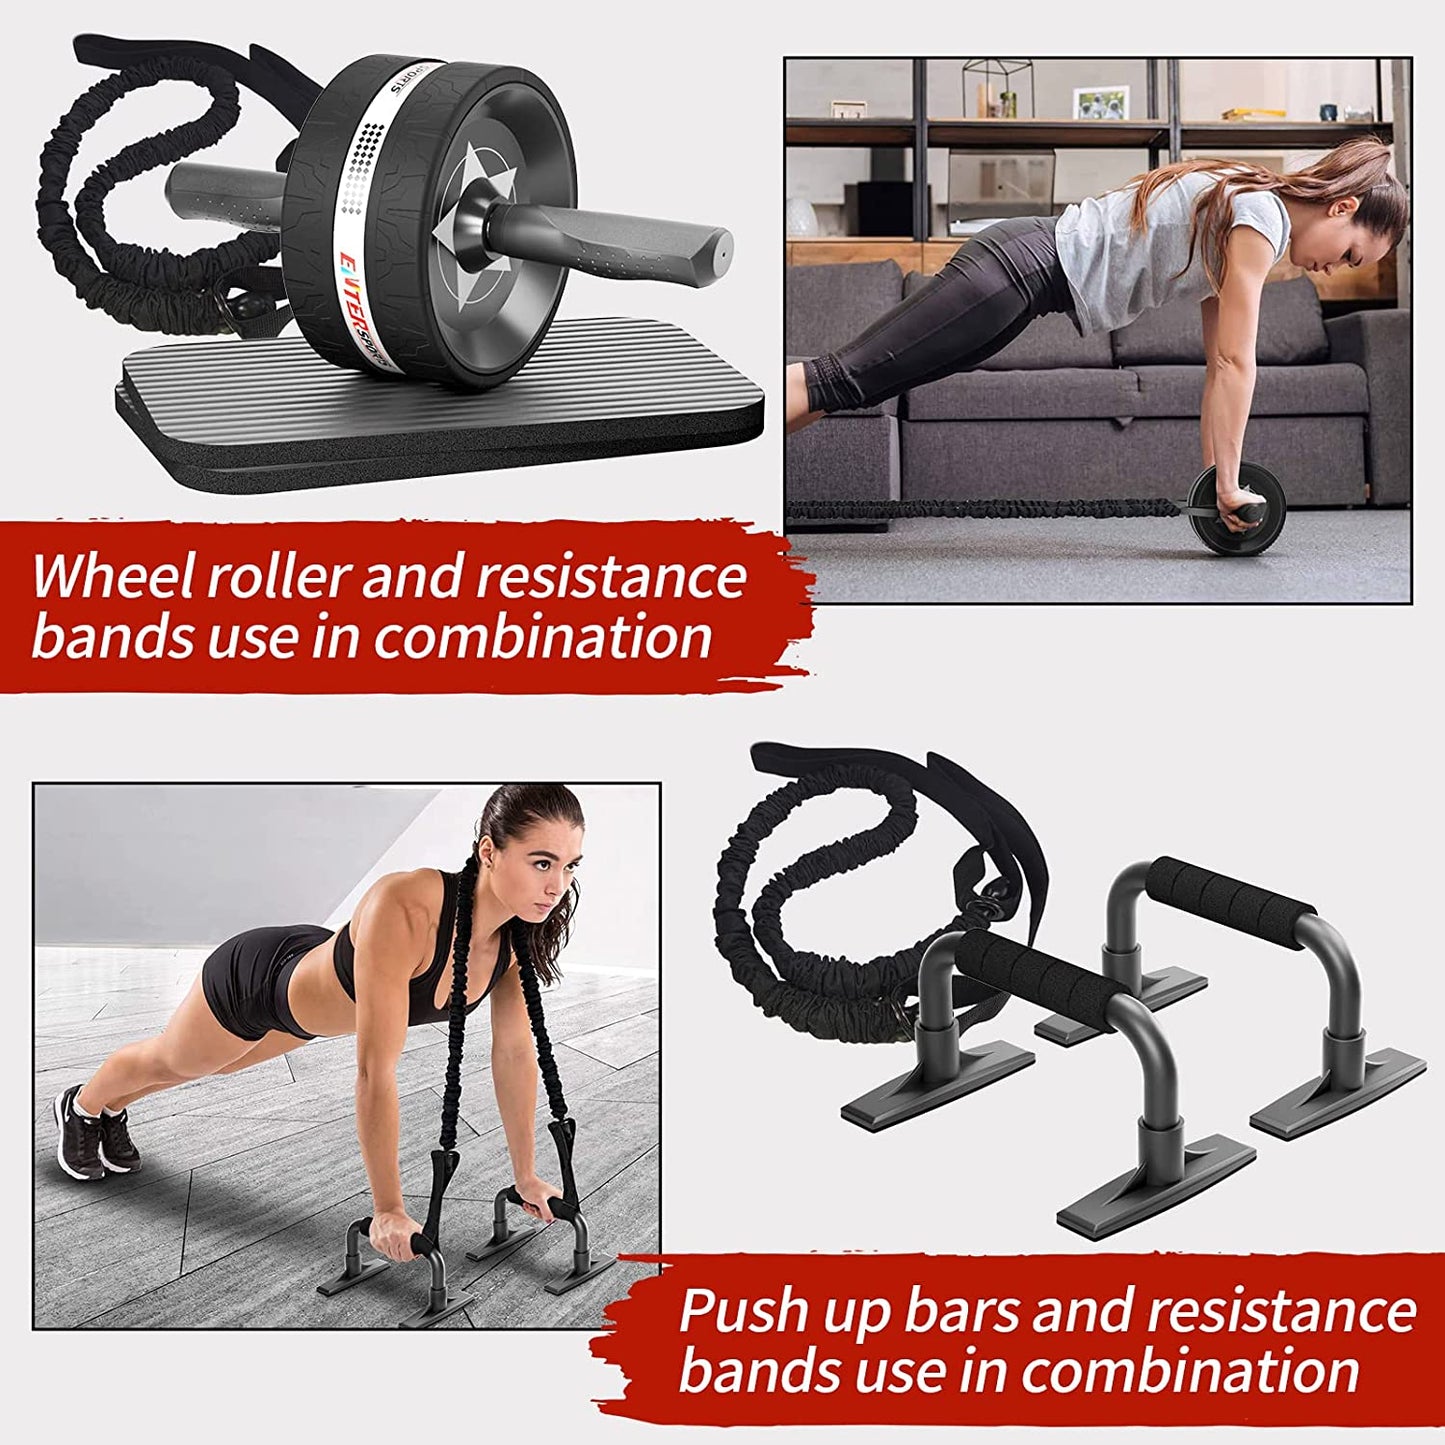 Ab Rollers Wheel Kit, Exercise Wheel Core Strength Training Abdominal Roller Set with Push up Bars, Resistance Bands, Knee Mat Home Gym Fitness Equipment for Abs Workout